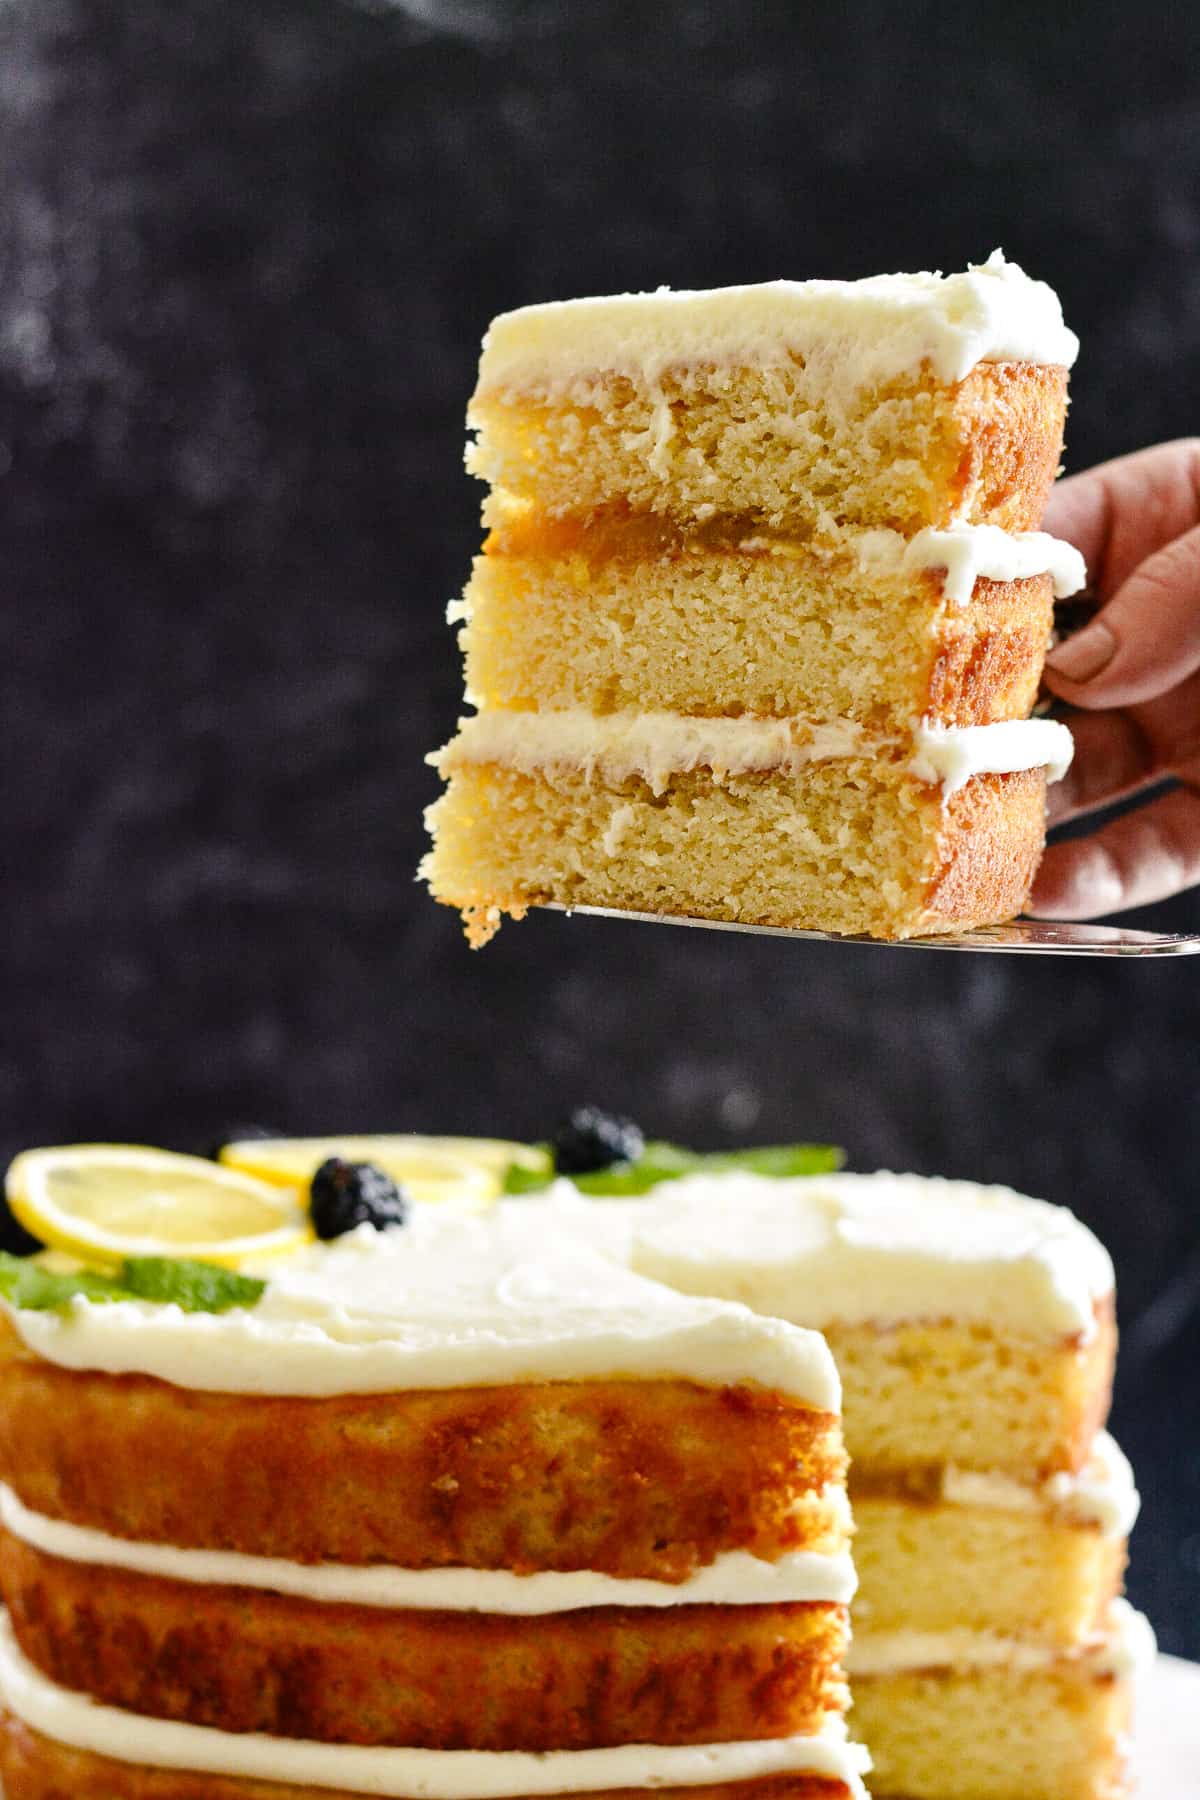 Hand holding a 3 layer slice of lemon cake on a cake server. Whole cake in the background on a cake plate.